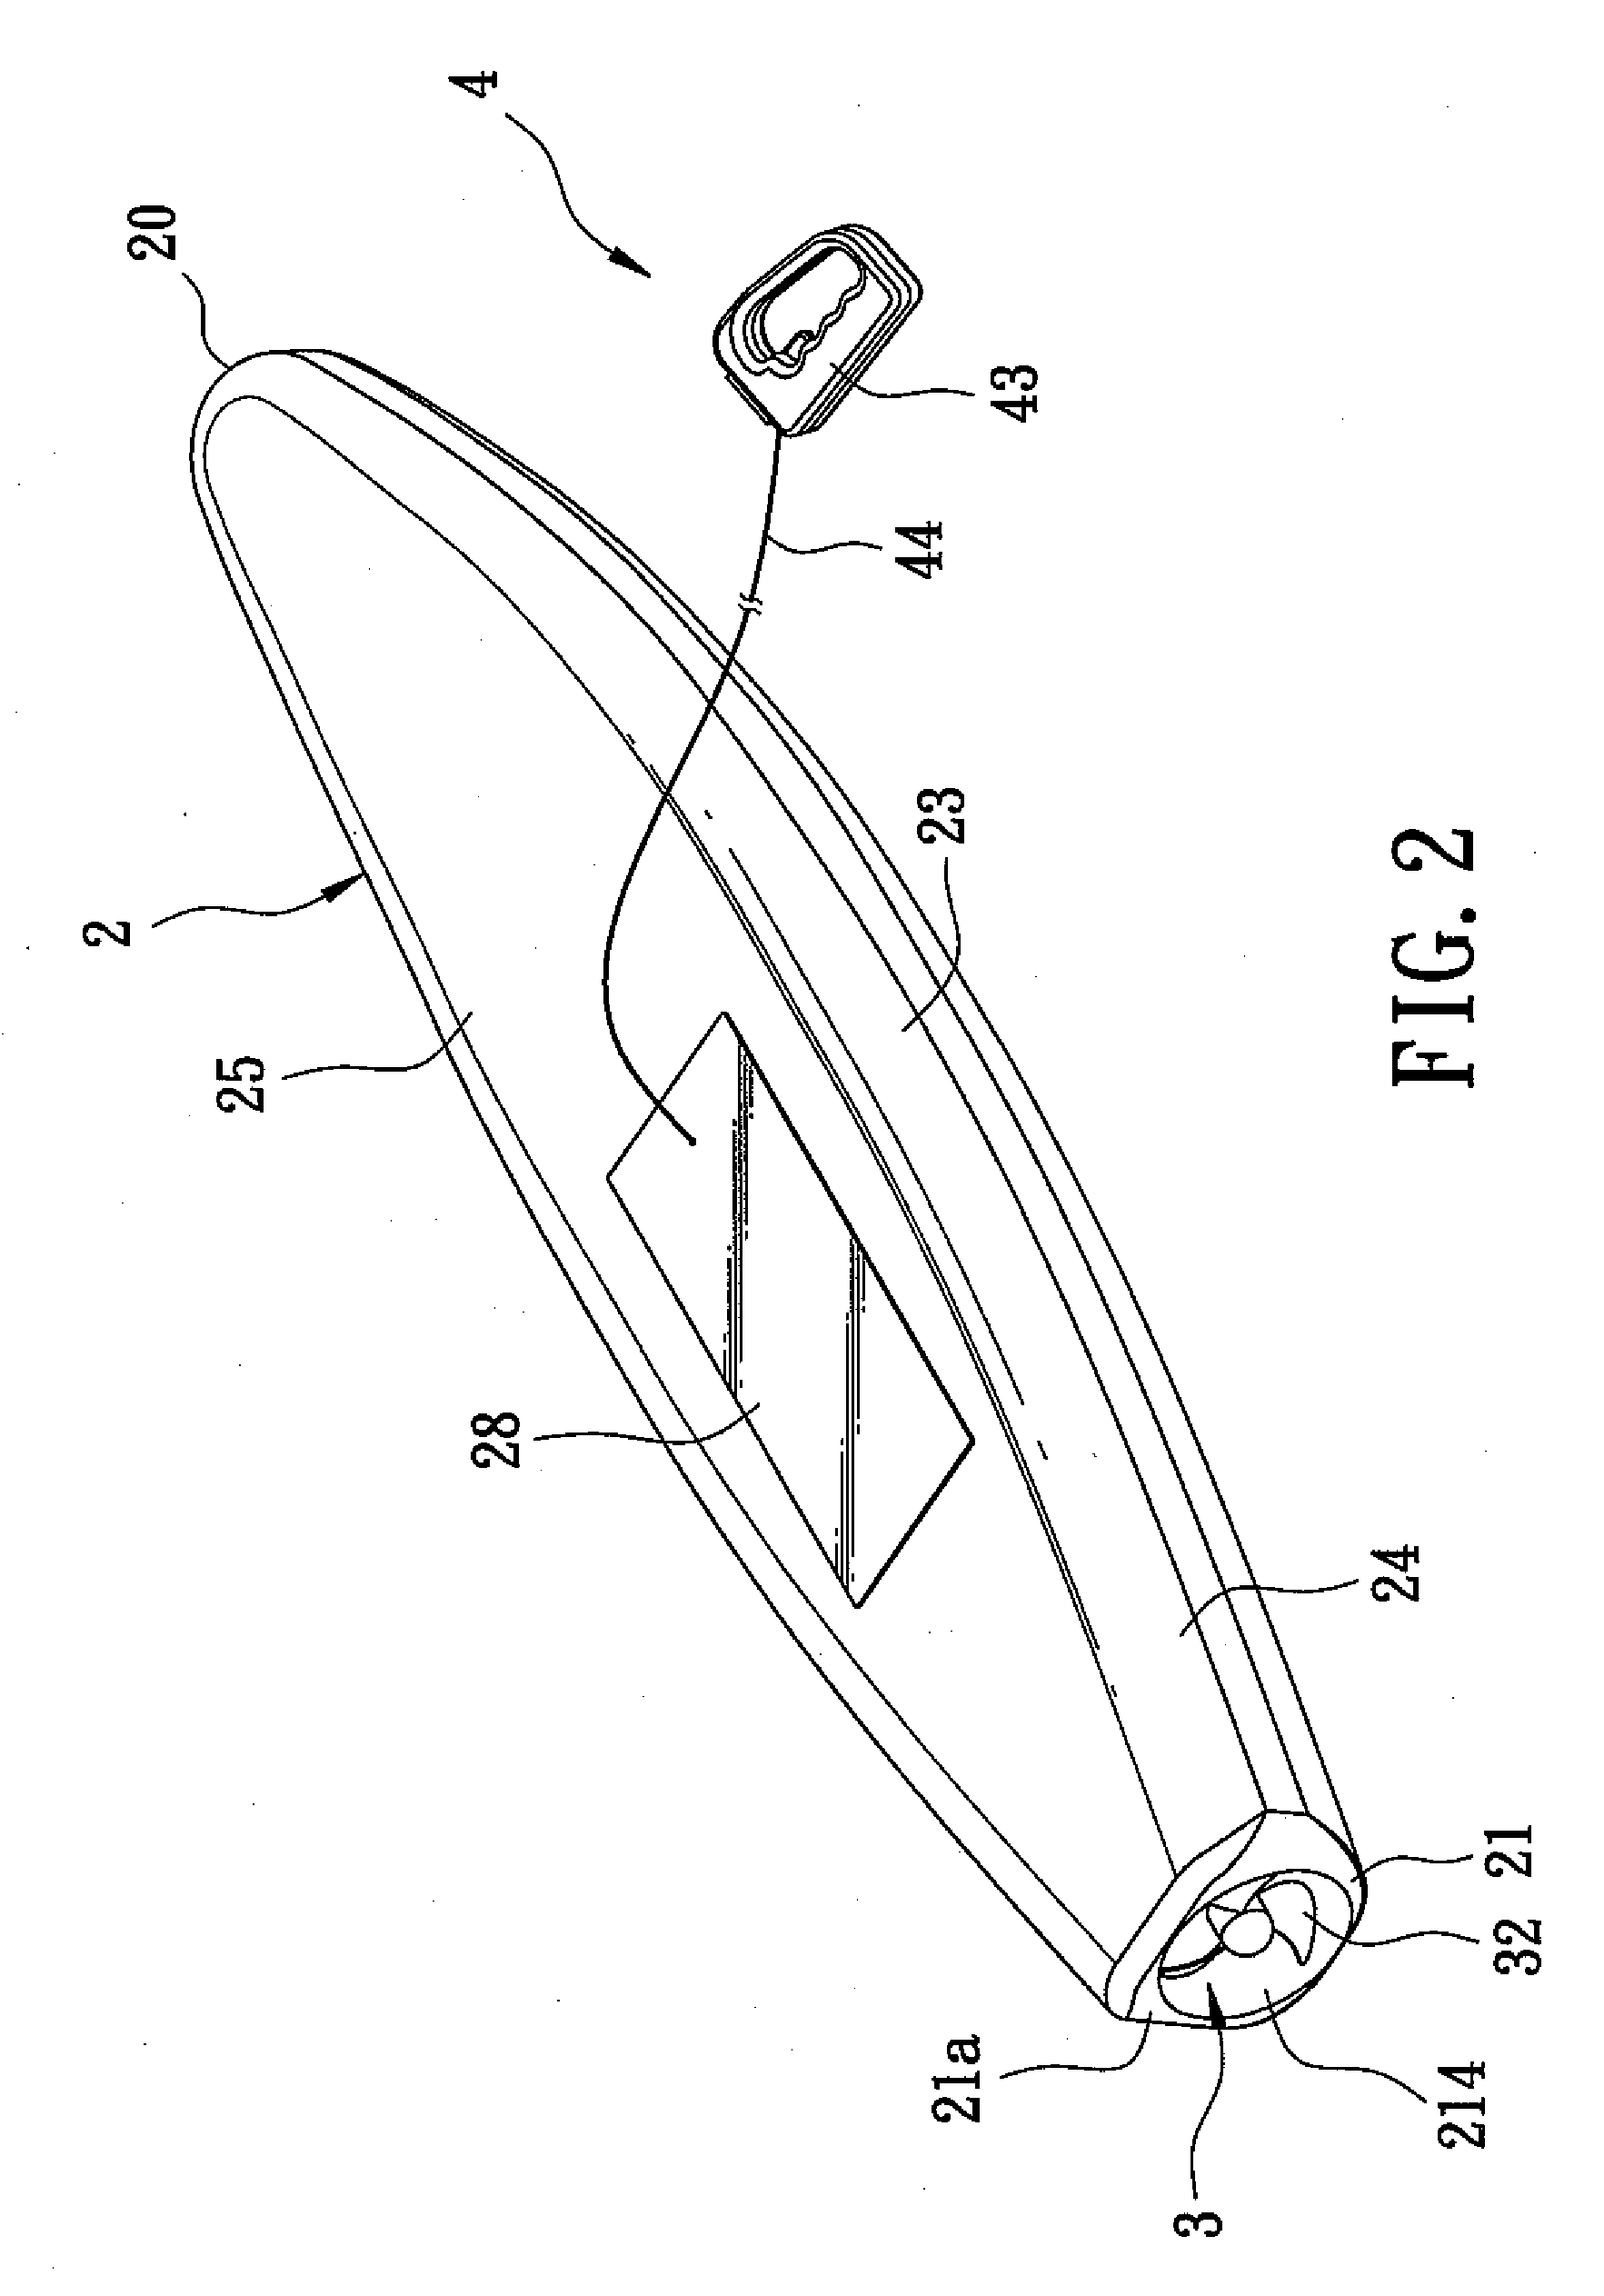 Propeller driven surfing device